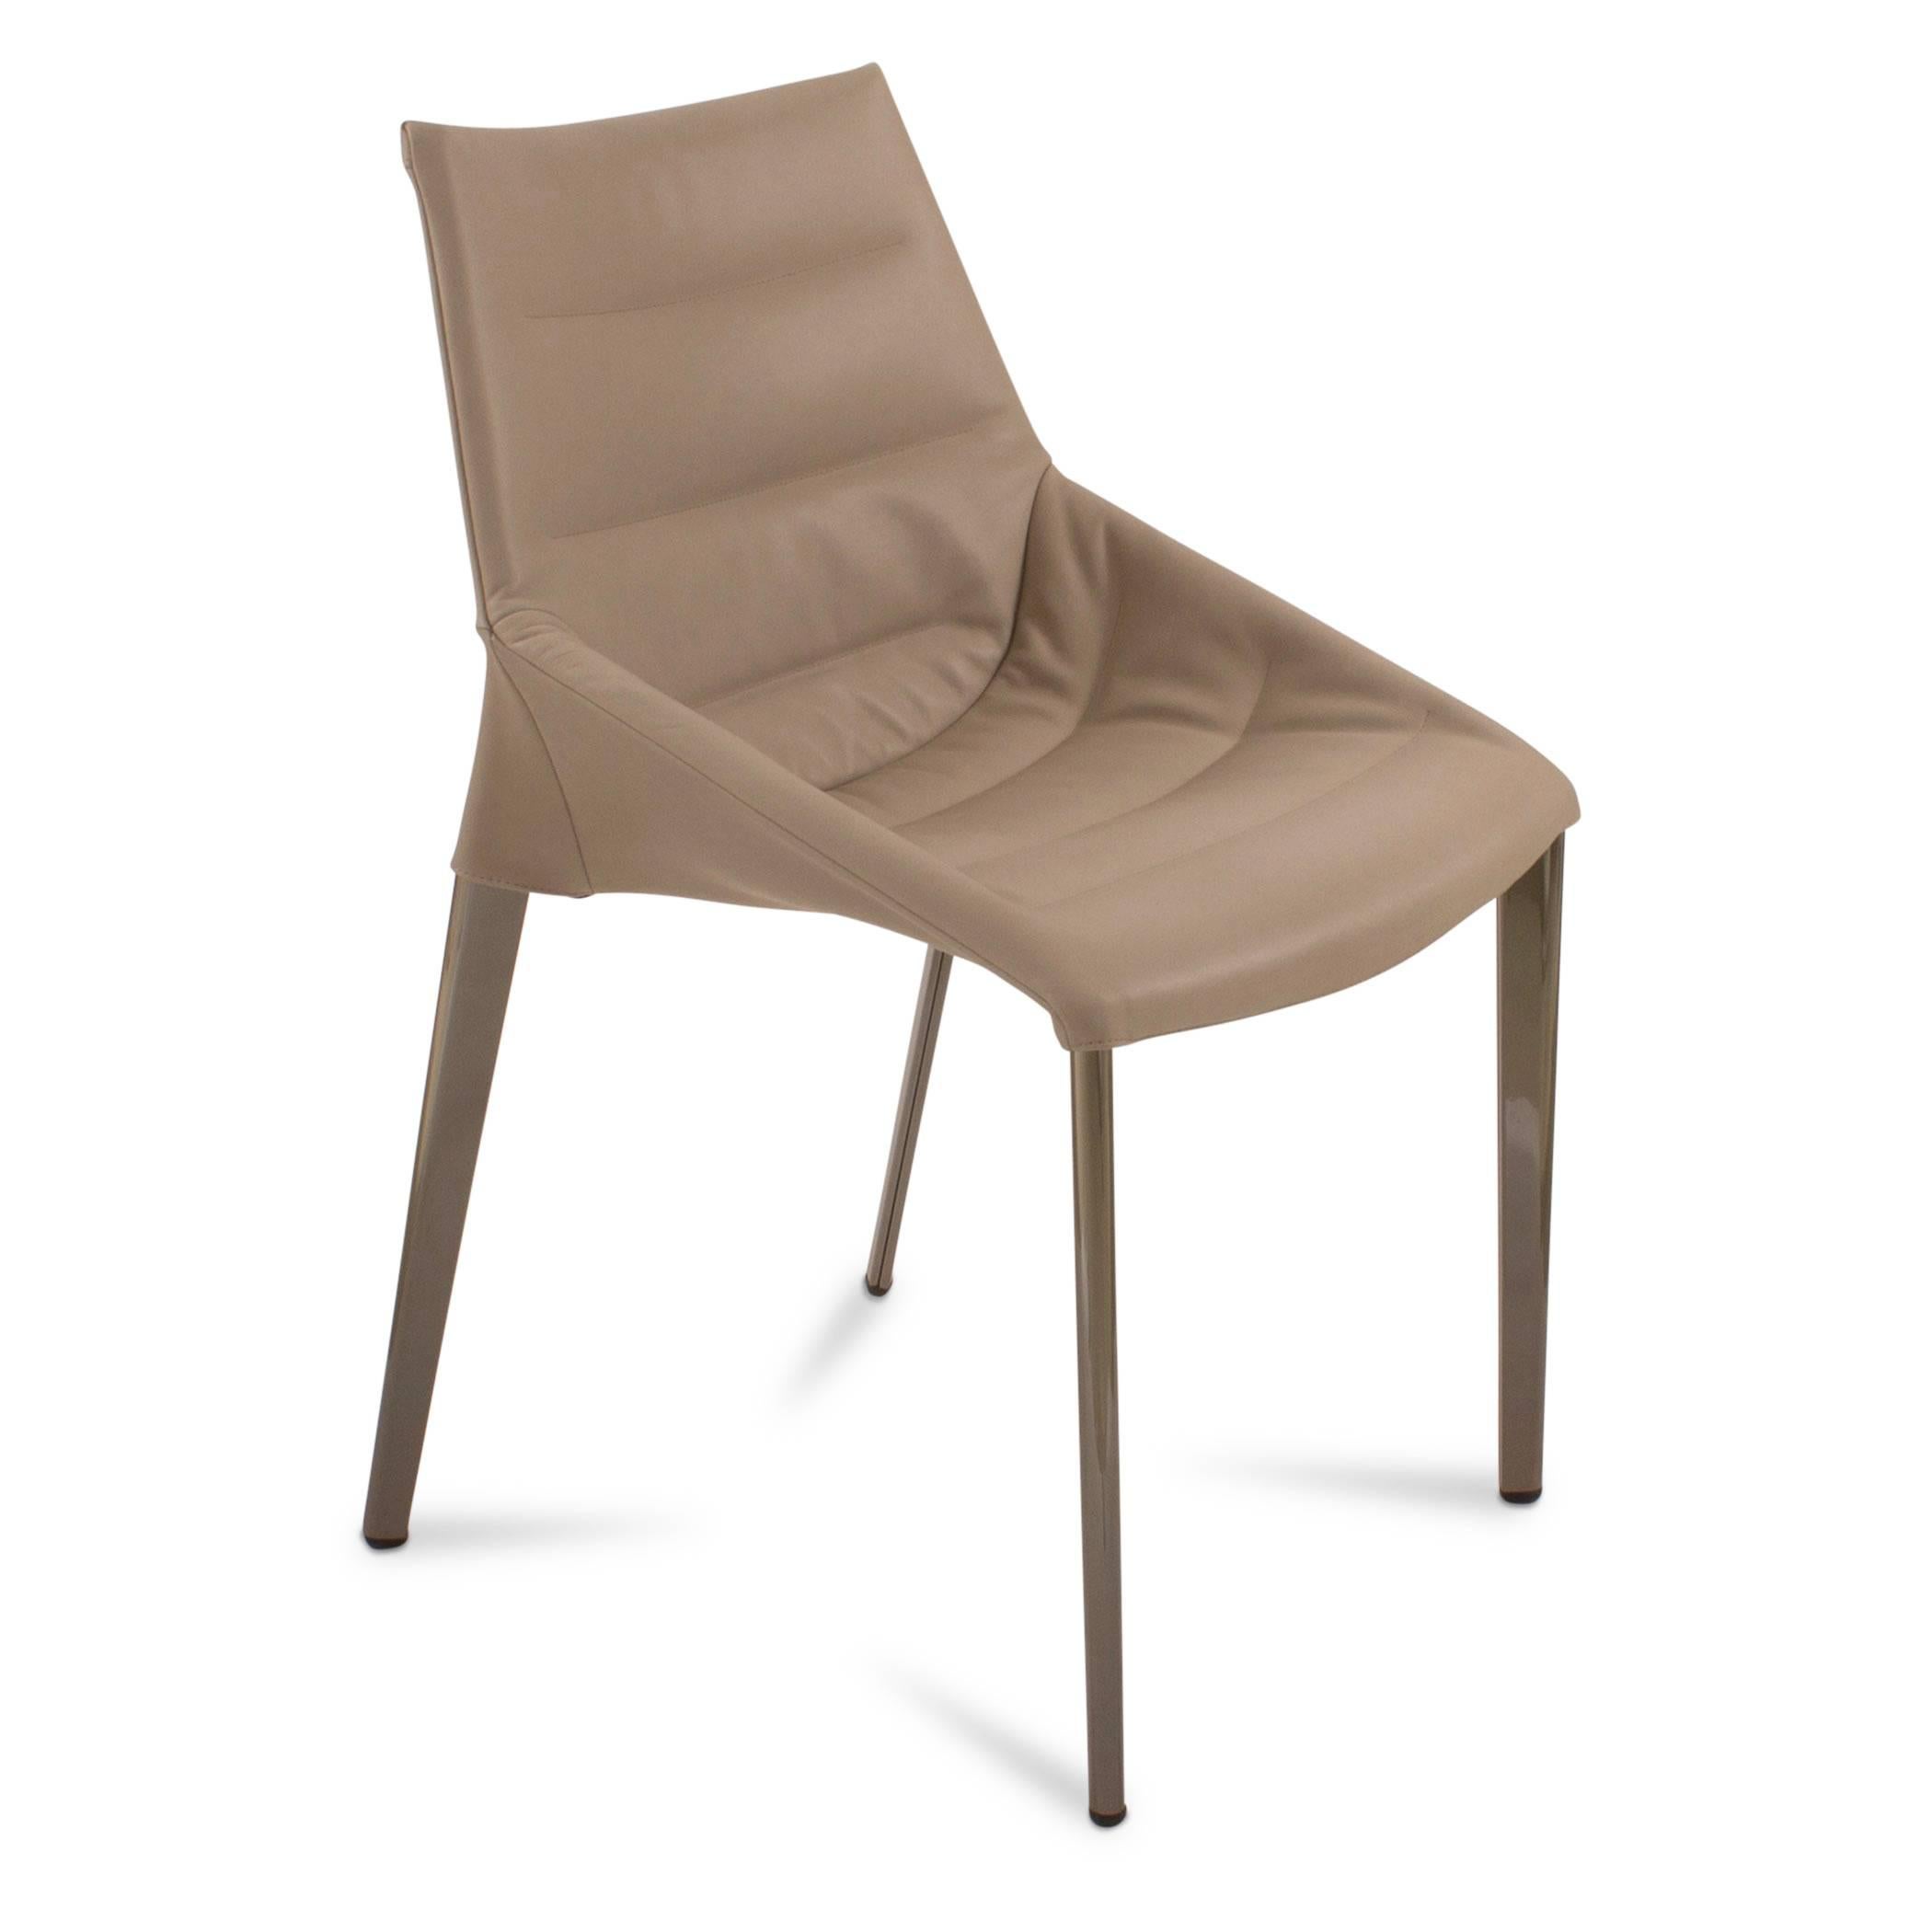 This version of Arik Levy’s outline chair combines comfort and functionality, thanks to an ergonomically correct fibreglass seat with removable covers. Outline is the ideal complement to all tables.